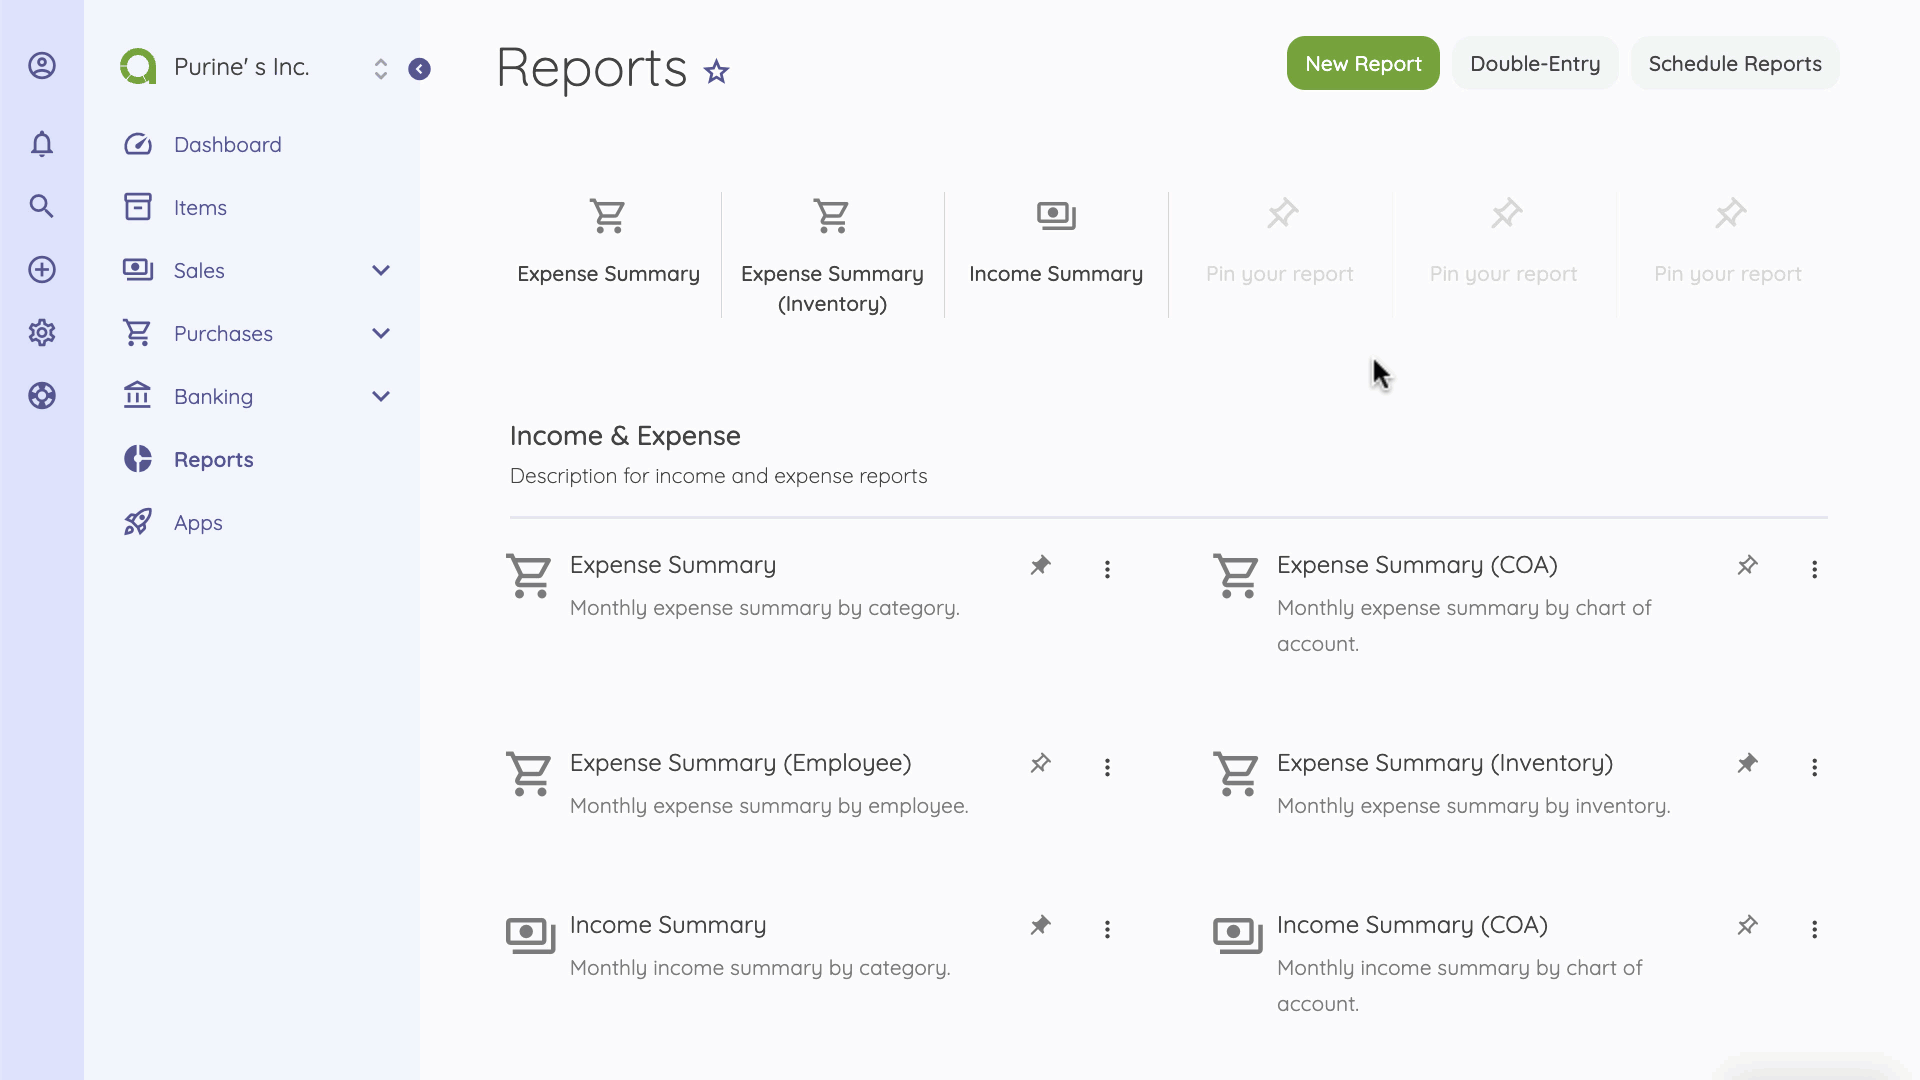 Reports details